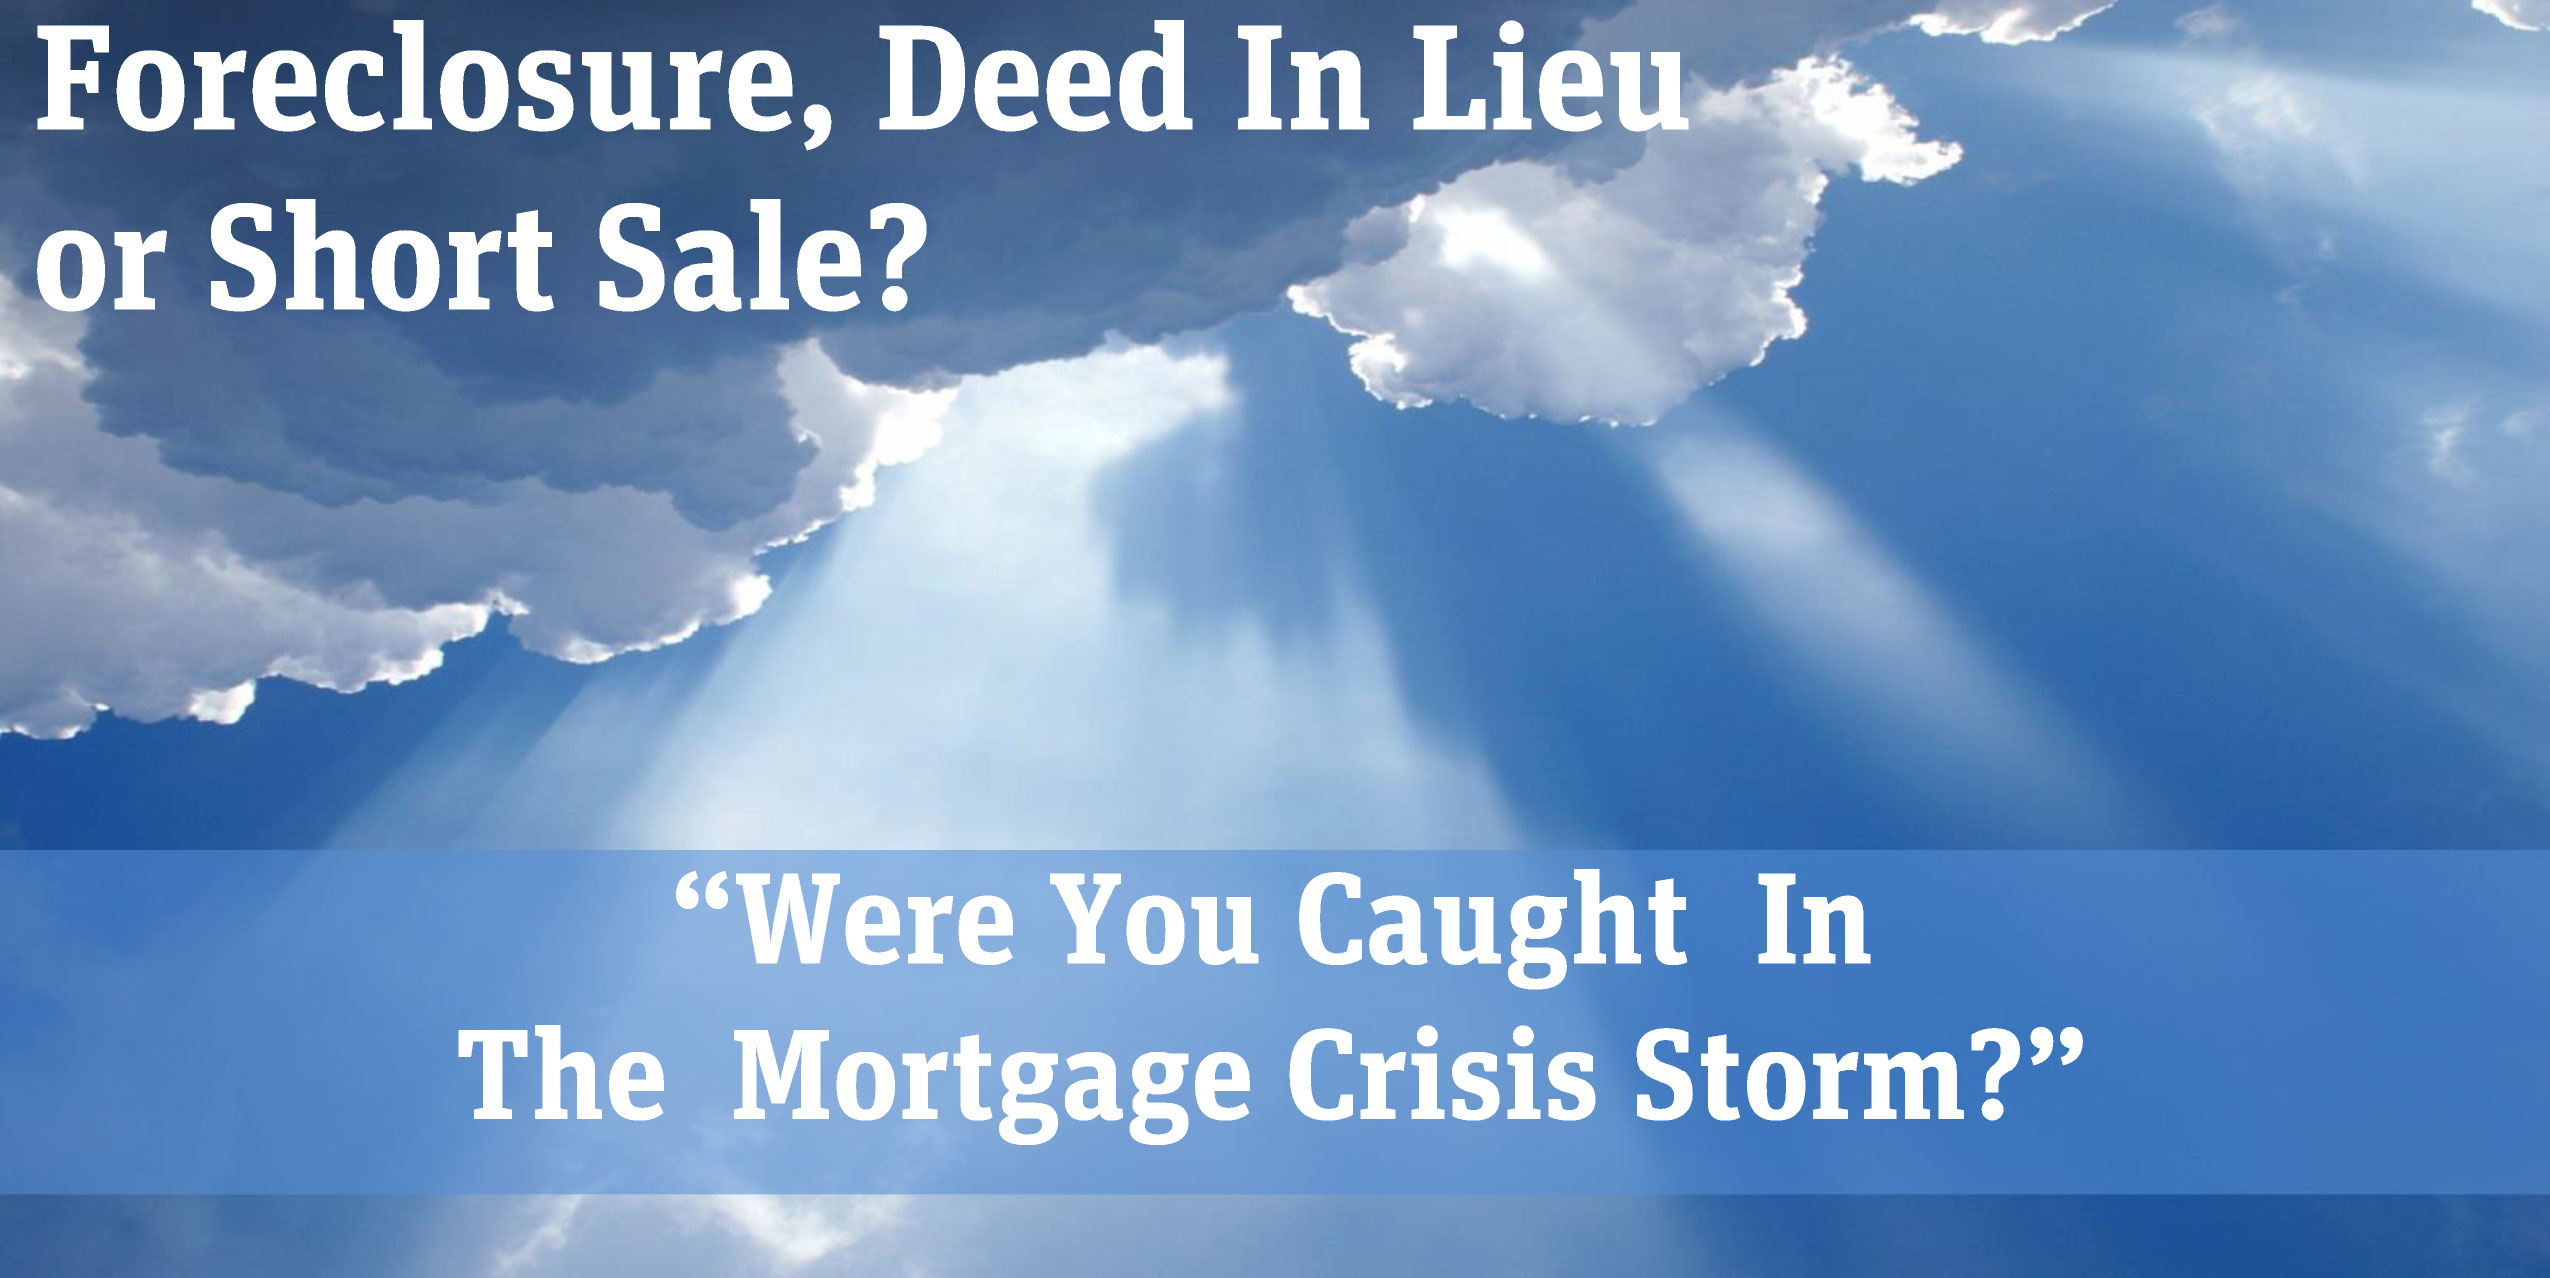 How Long do I have to Wait for a Mortgage after Short Sale or Foreclosure?